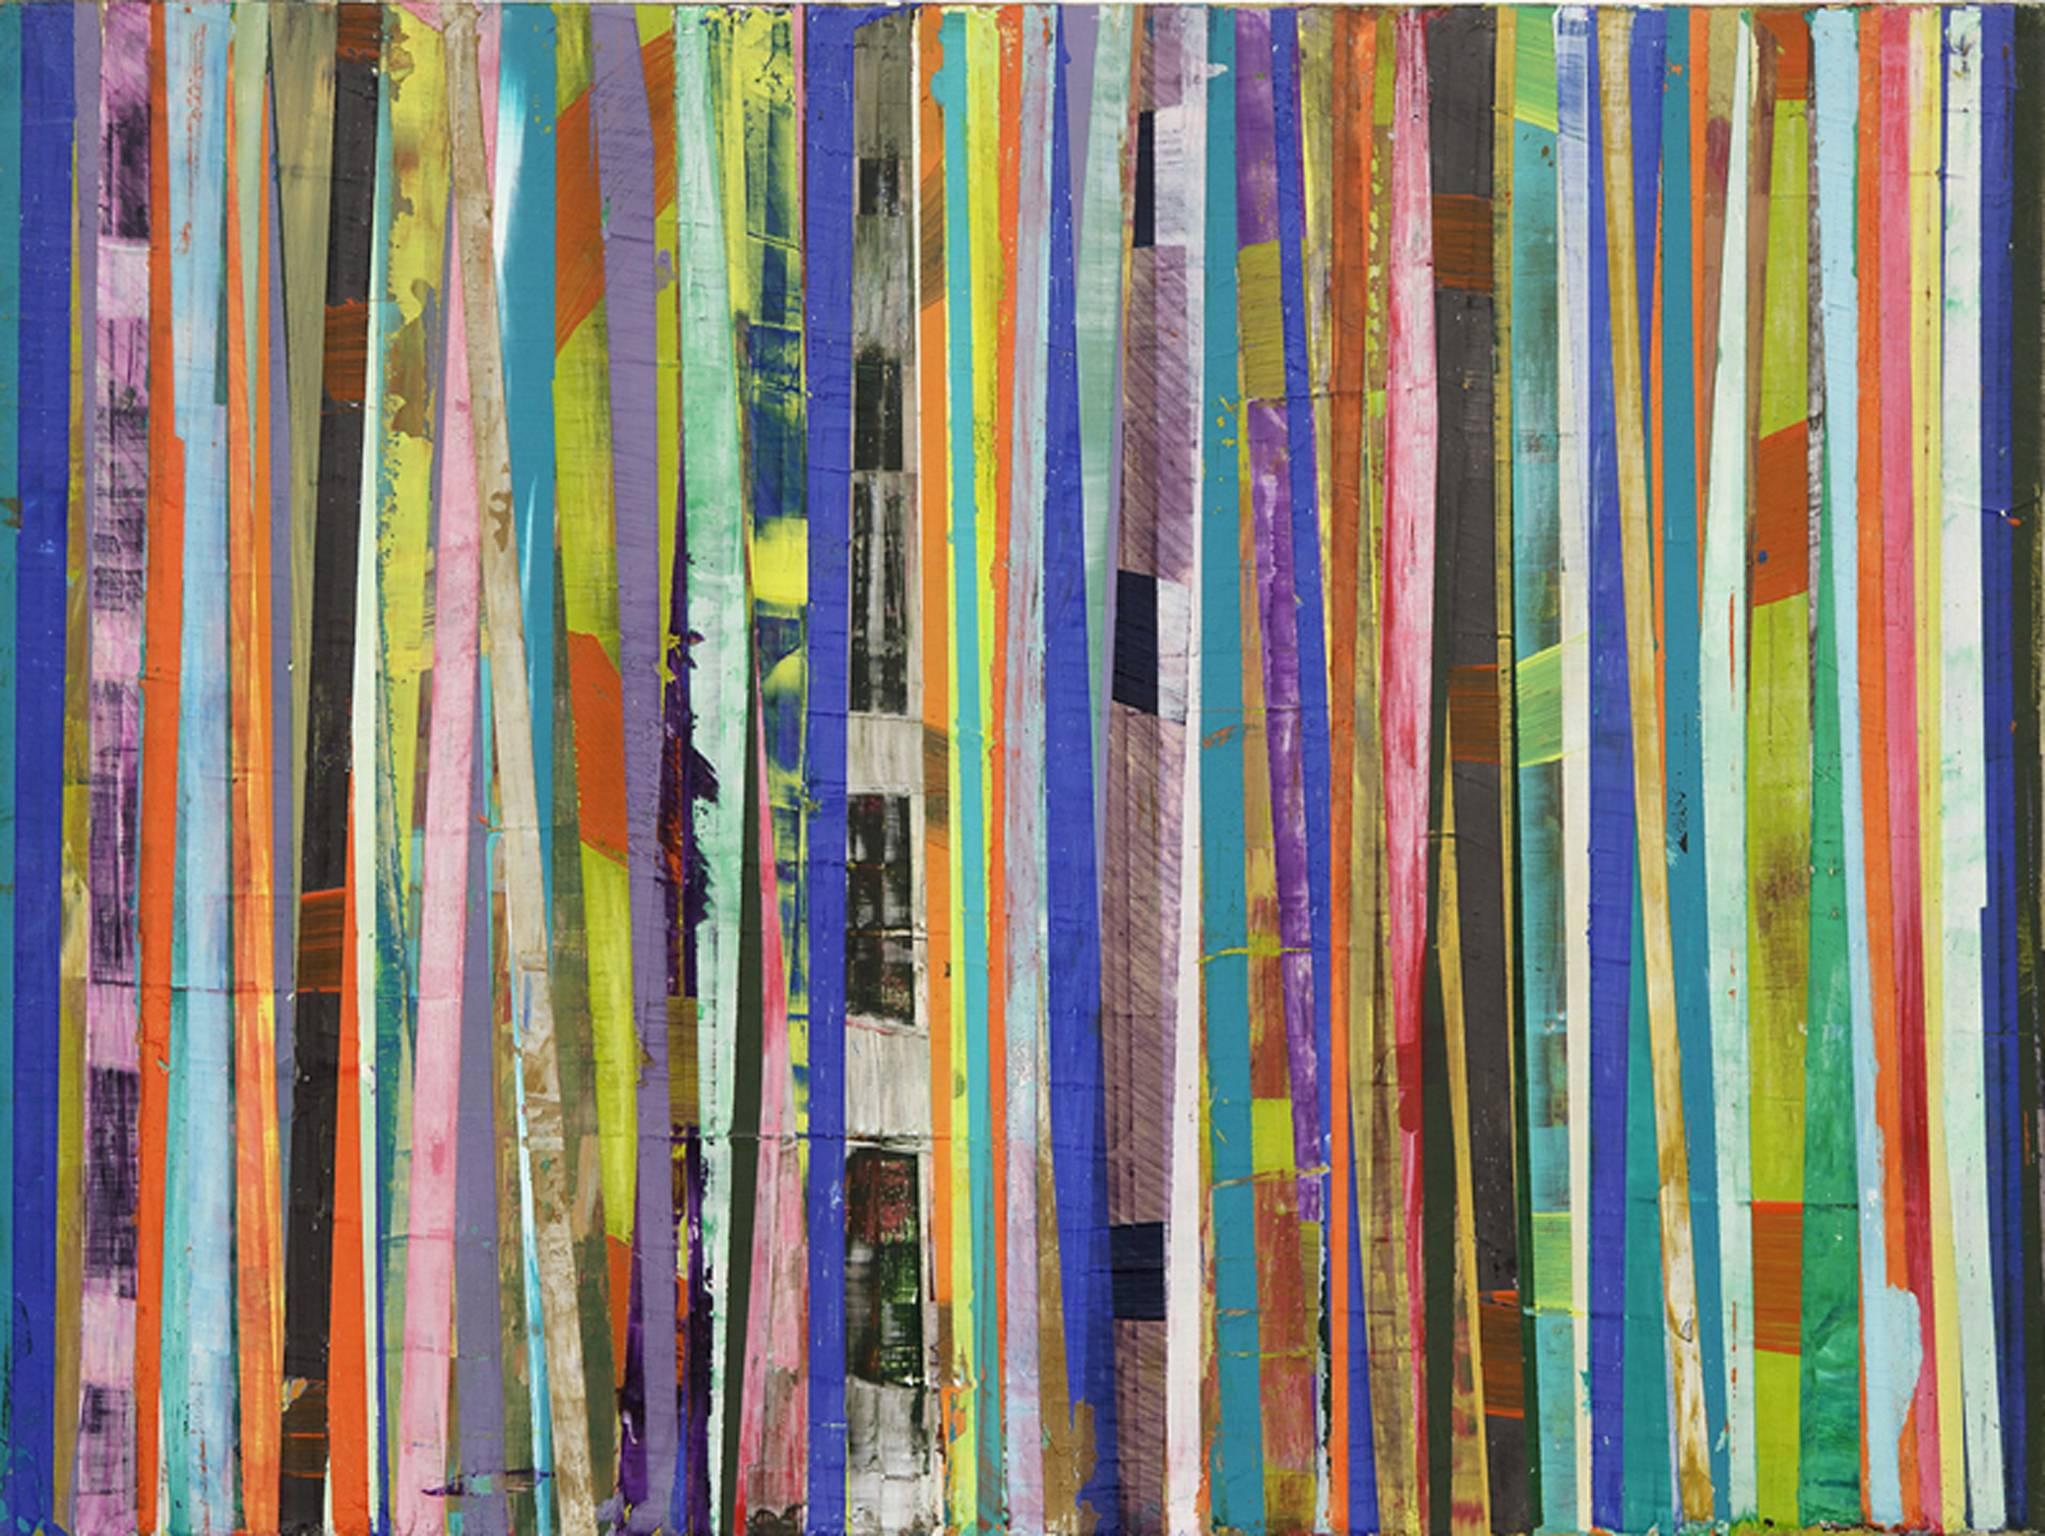 Bar-Code: Horizontal Mixed Media Painting with Colorful Vertical Striped Pattern